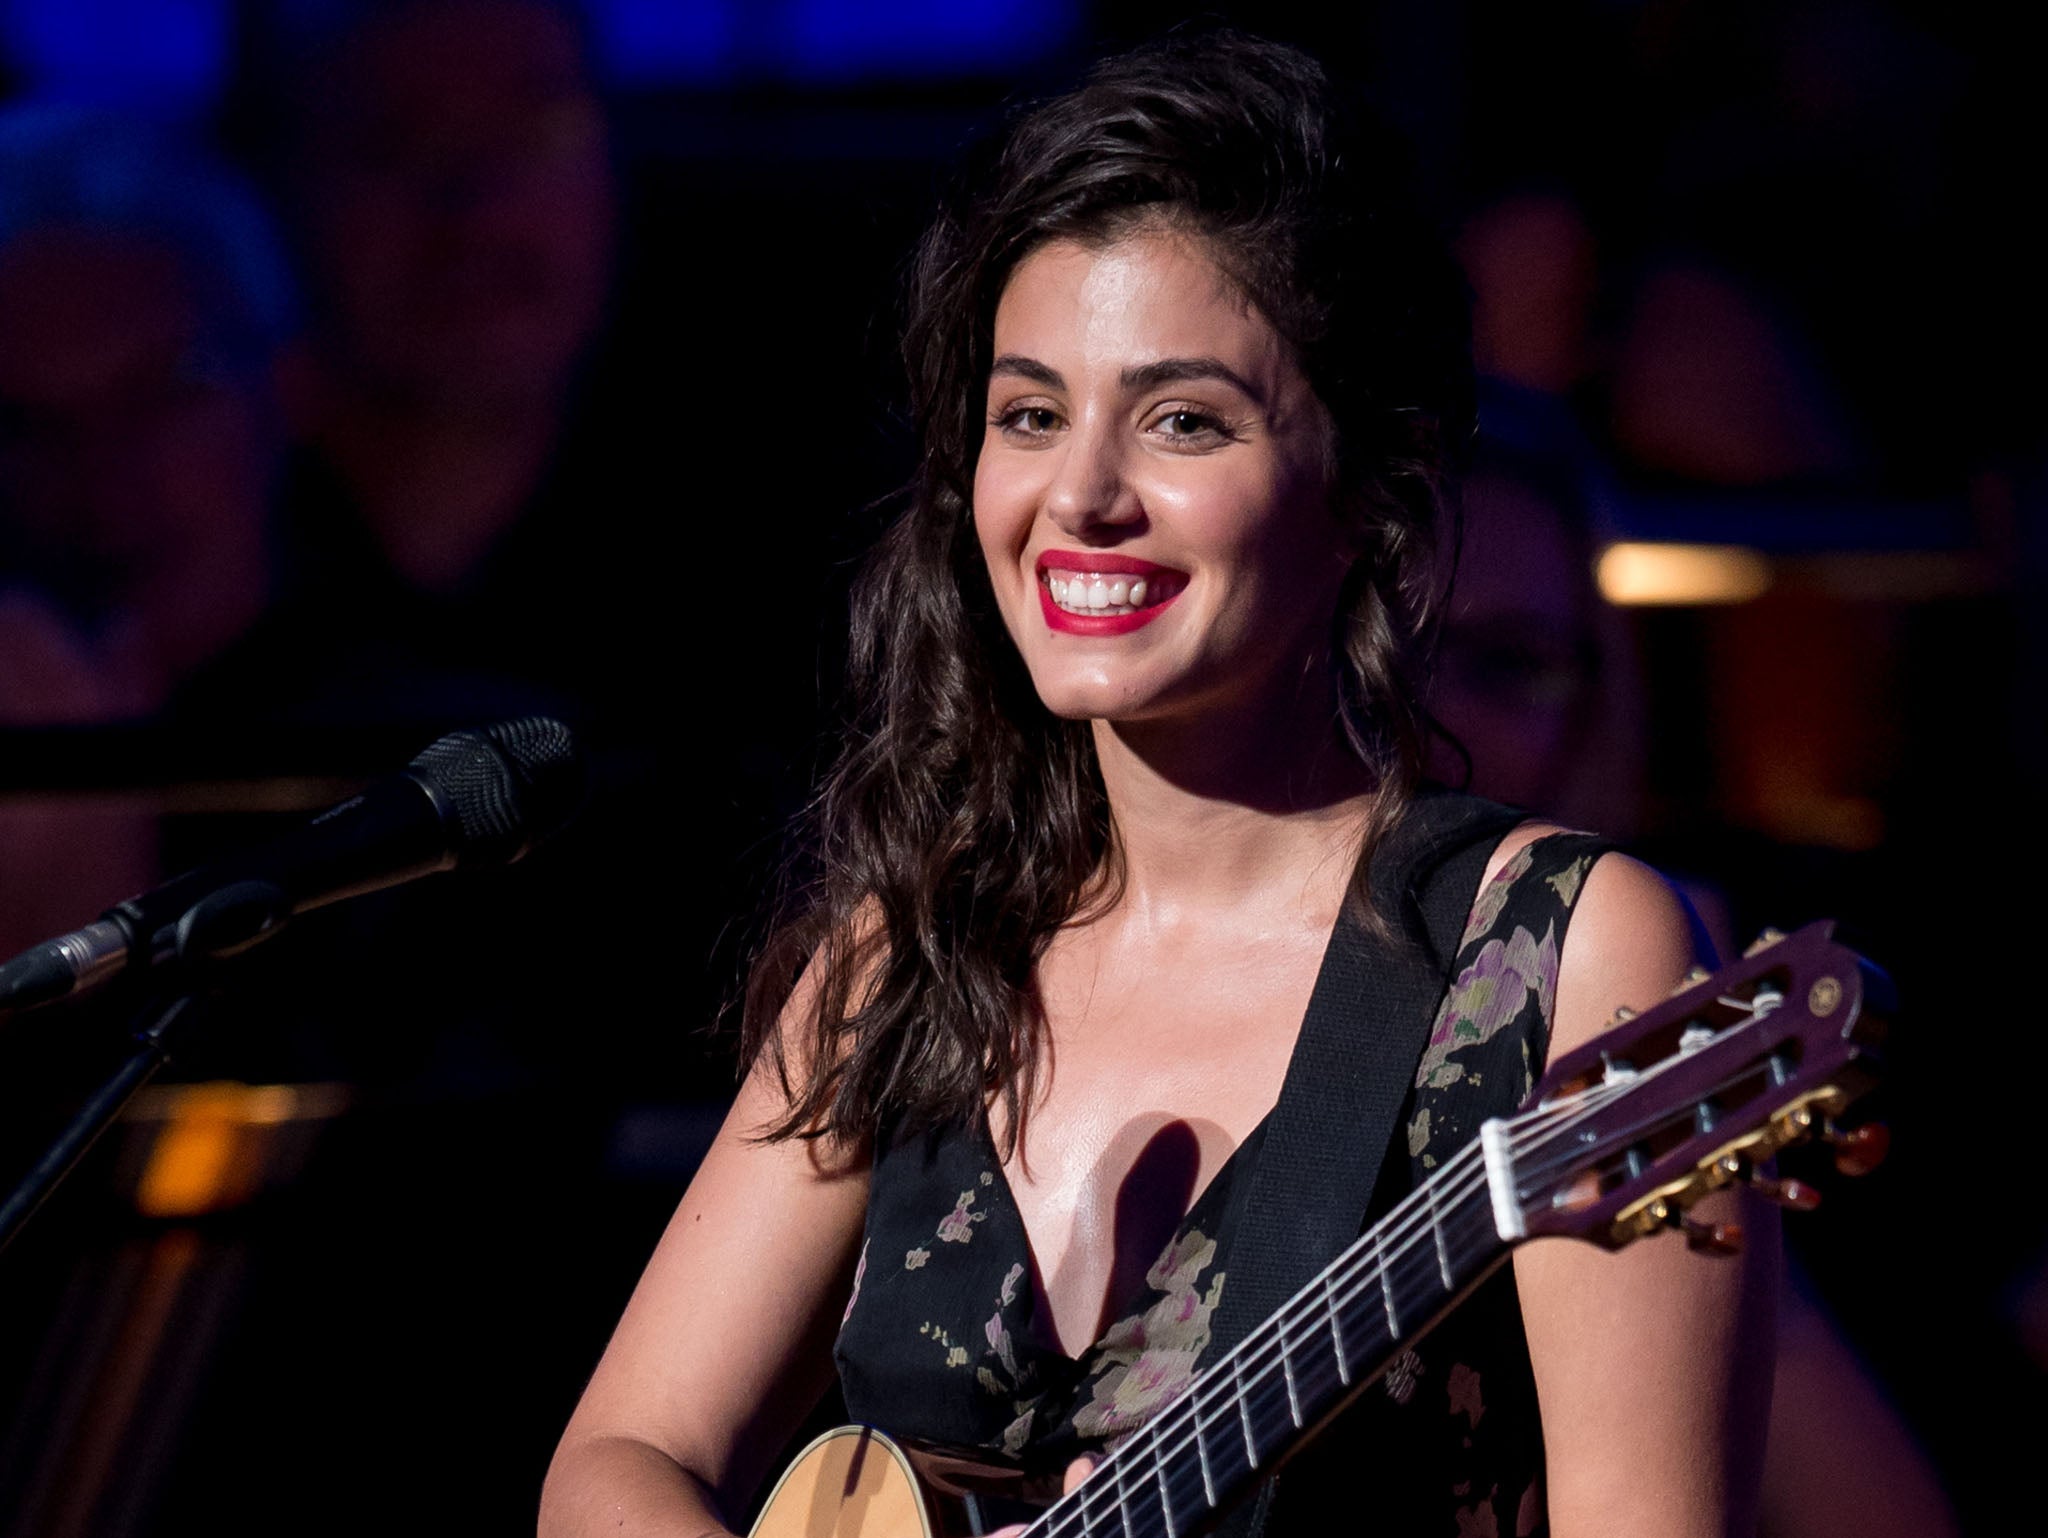 Singer/songwriter Katie Melua performs in the Royal Festival Hall in London, 2013